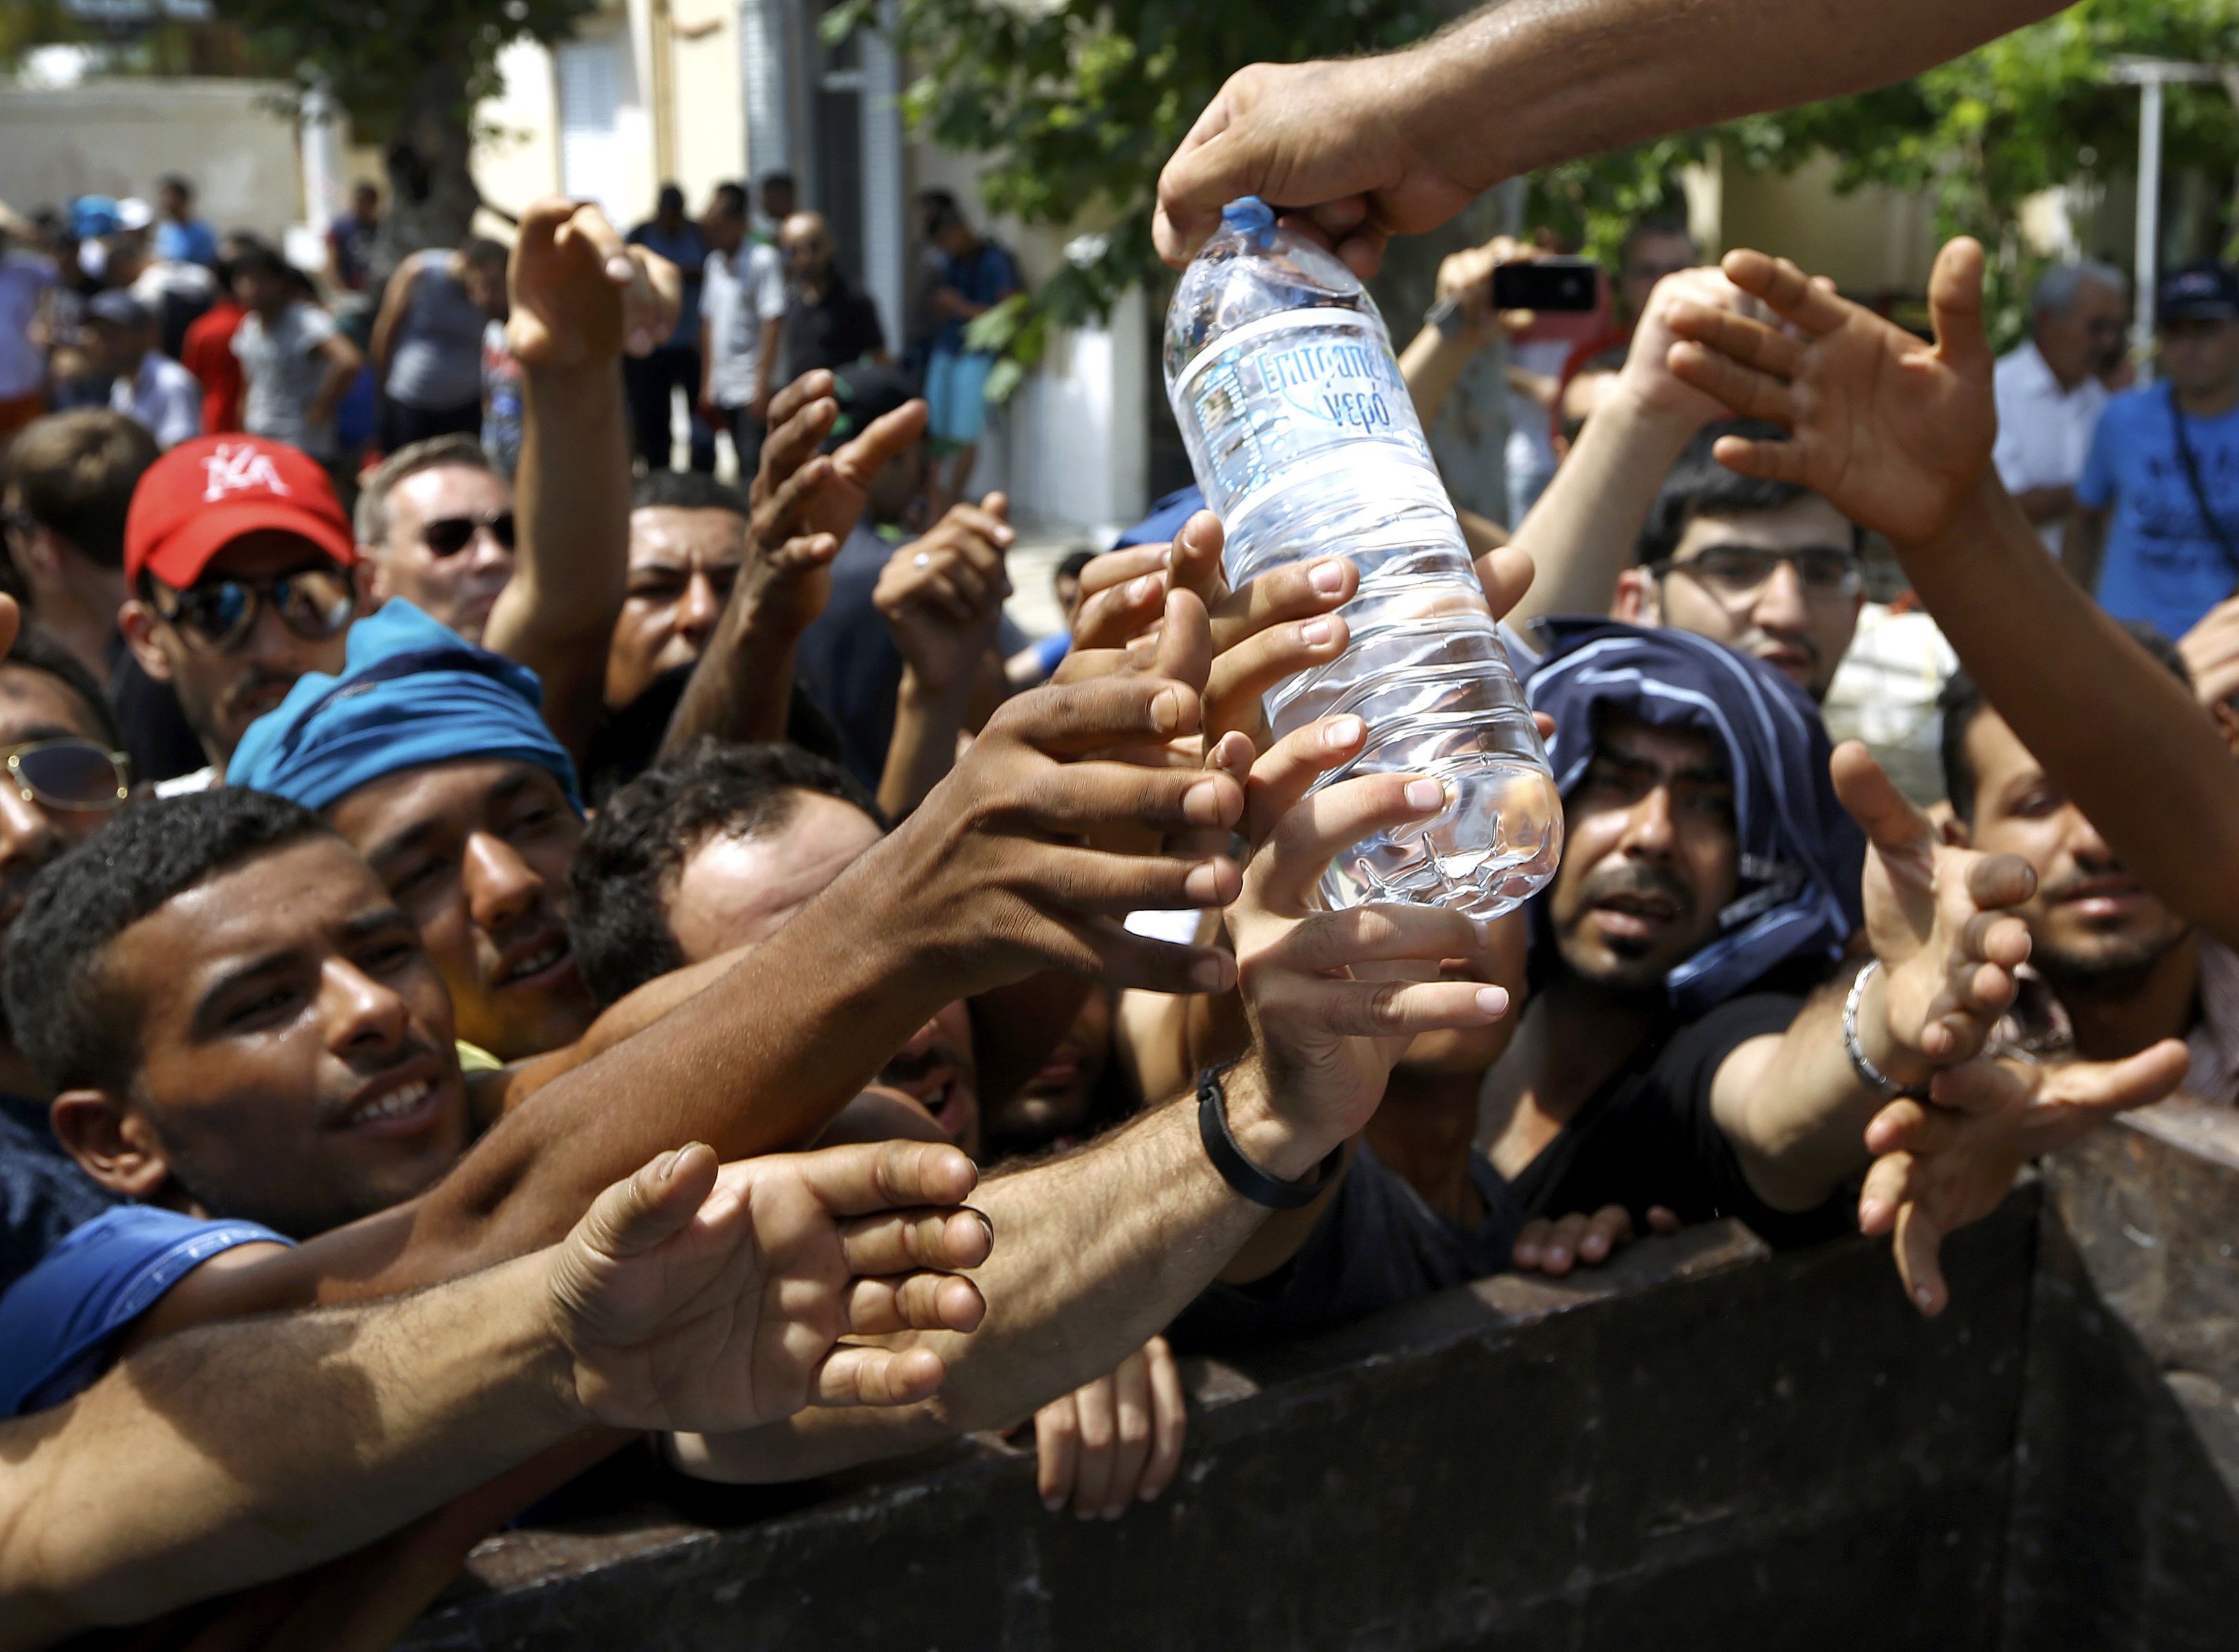 Syrian refugees and other migrants struggle to get water during aid distribution by workers of the Kos municipality on the Greek island of Kos August 14, 2015. United Nations refugee agency (UNHCR) called on Greece to take control of the 